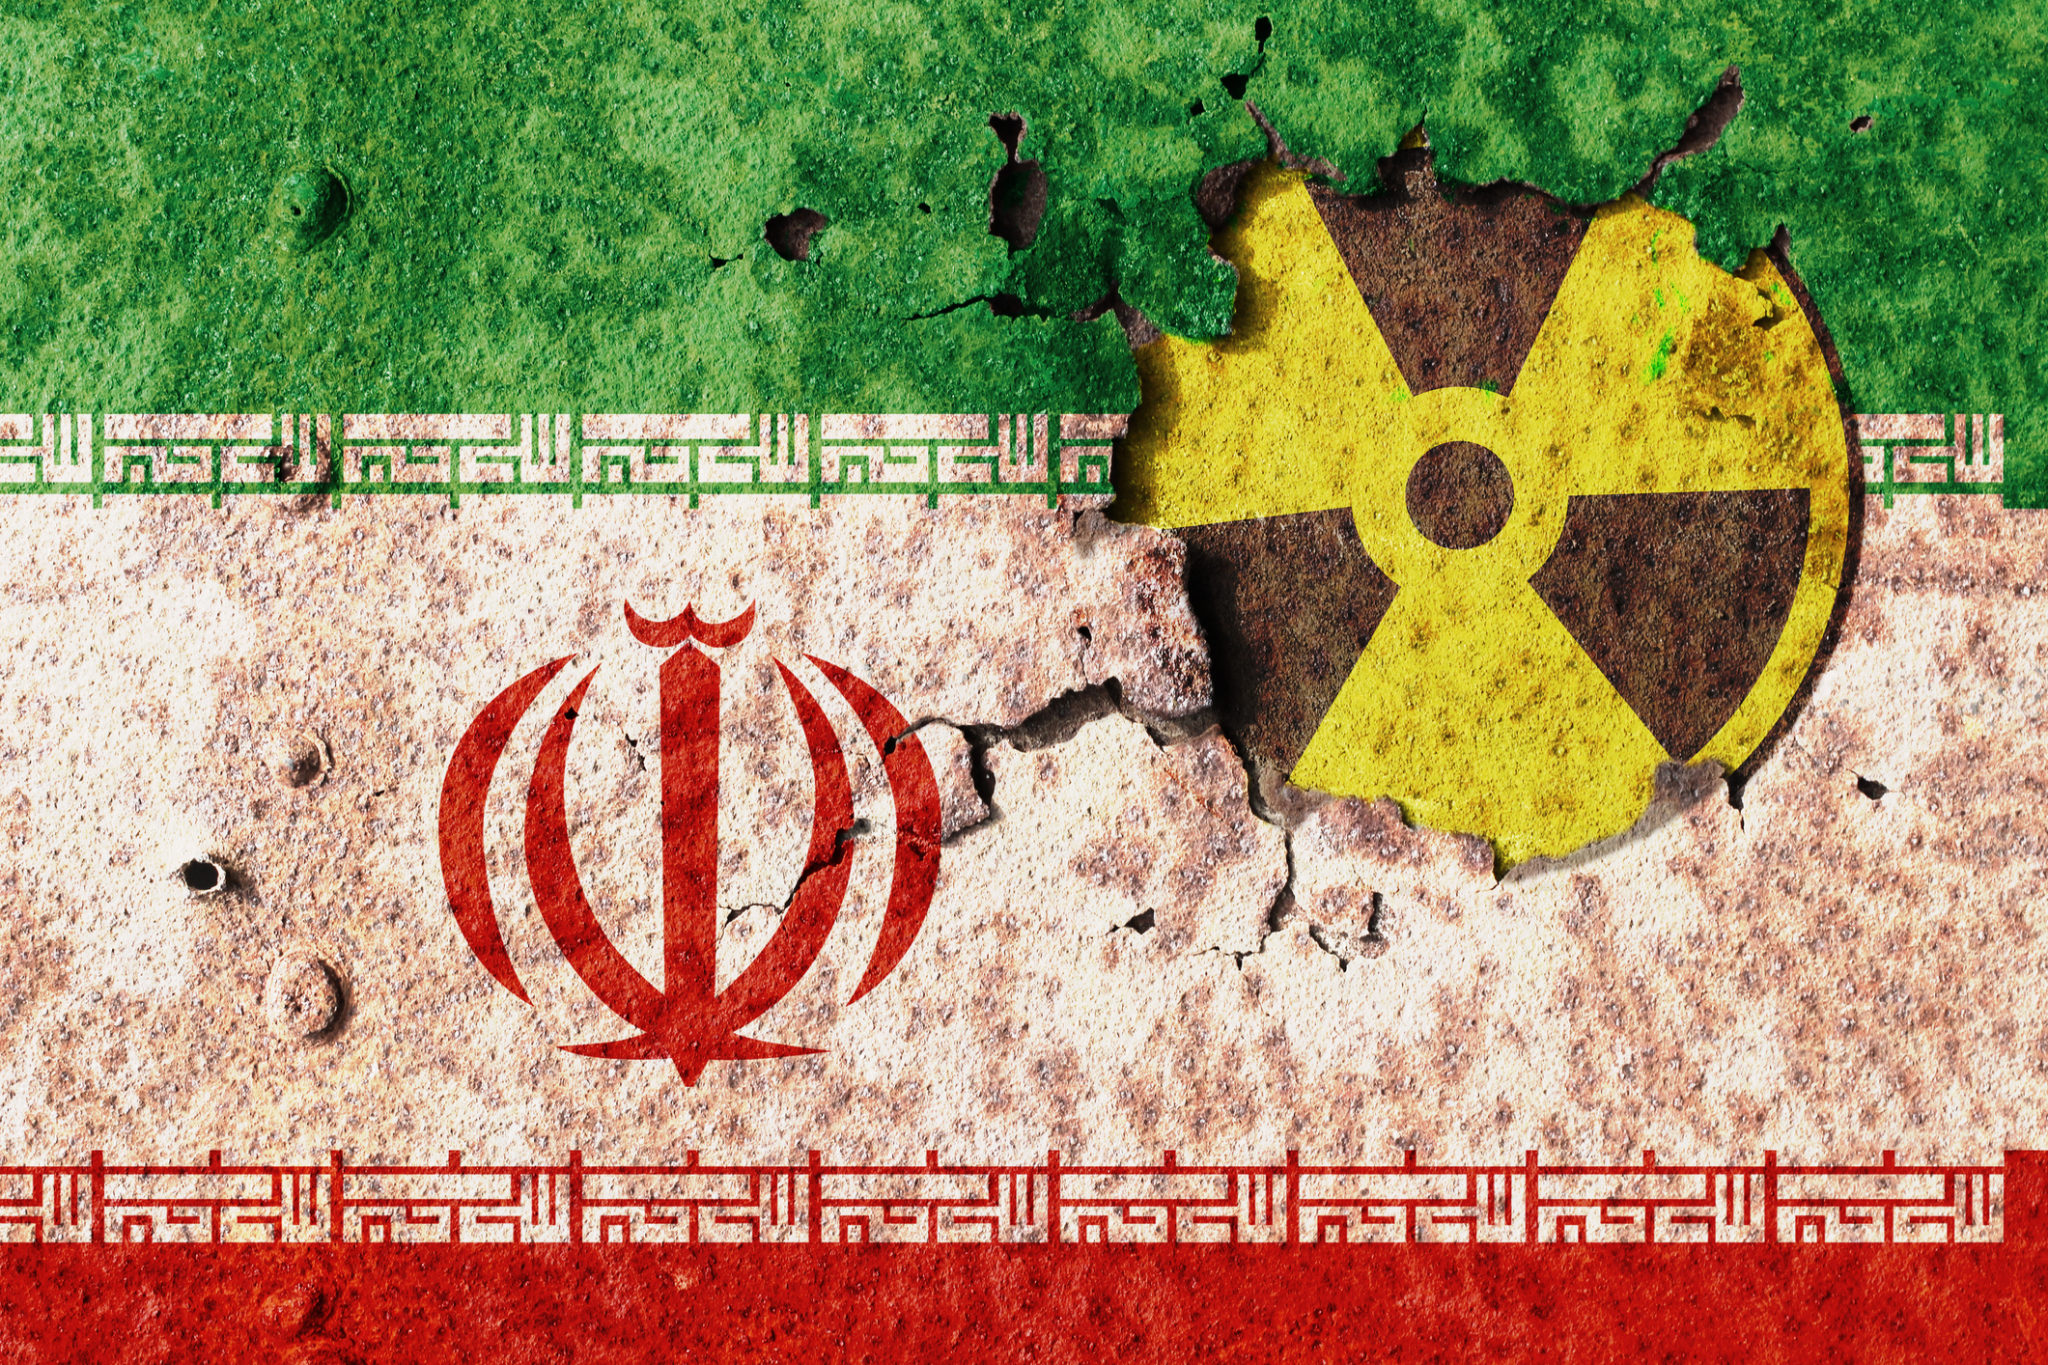 Deal or No Deal on Iran’s Nuclear Program?